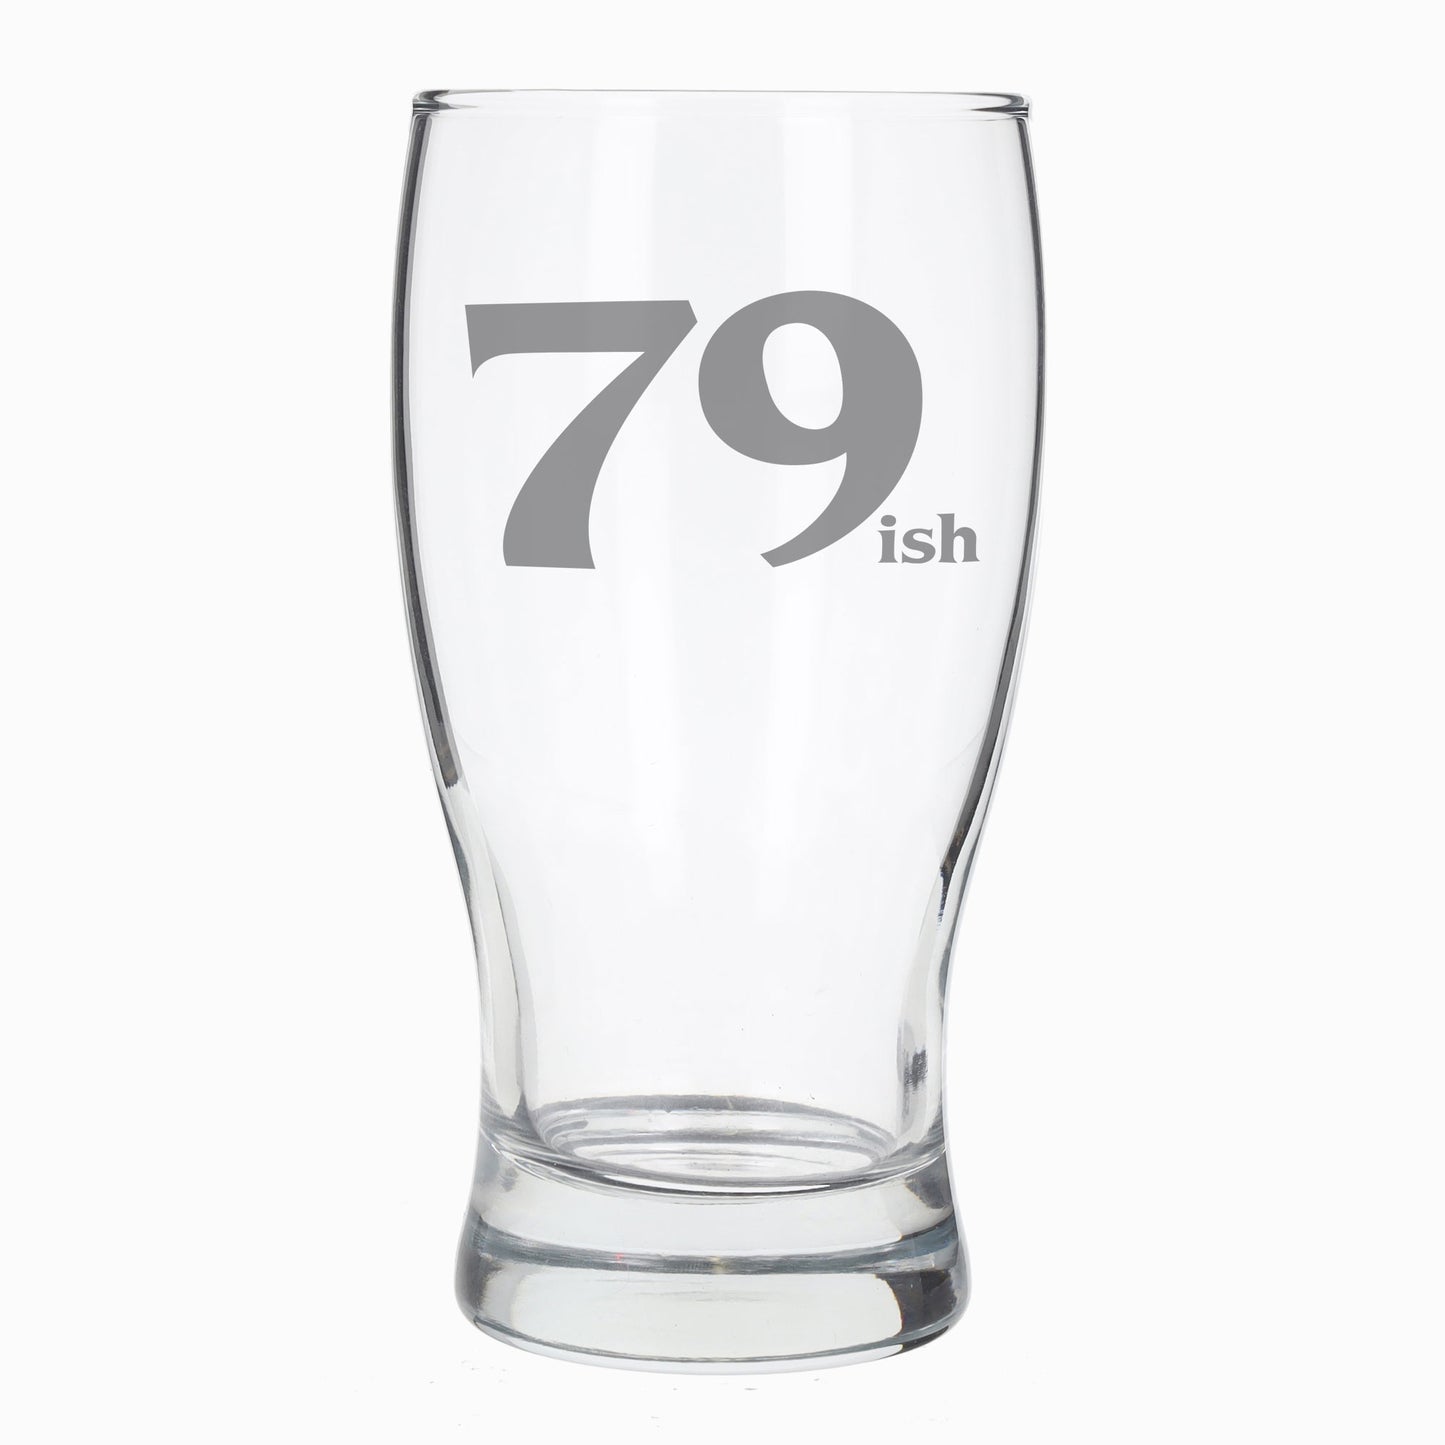 79ish Pint Glass and/or Coaster Set  - Always Looking Good - Pint Glass On Its Own  